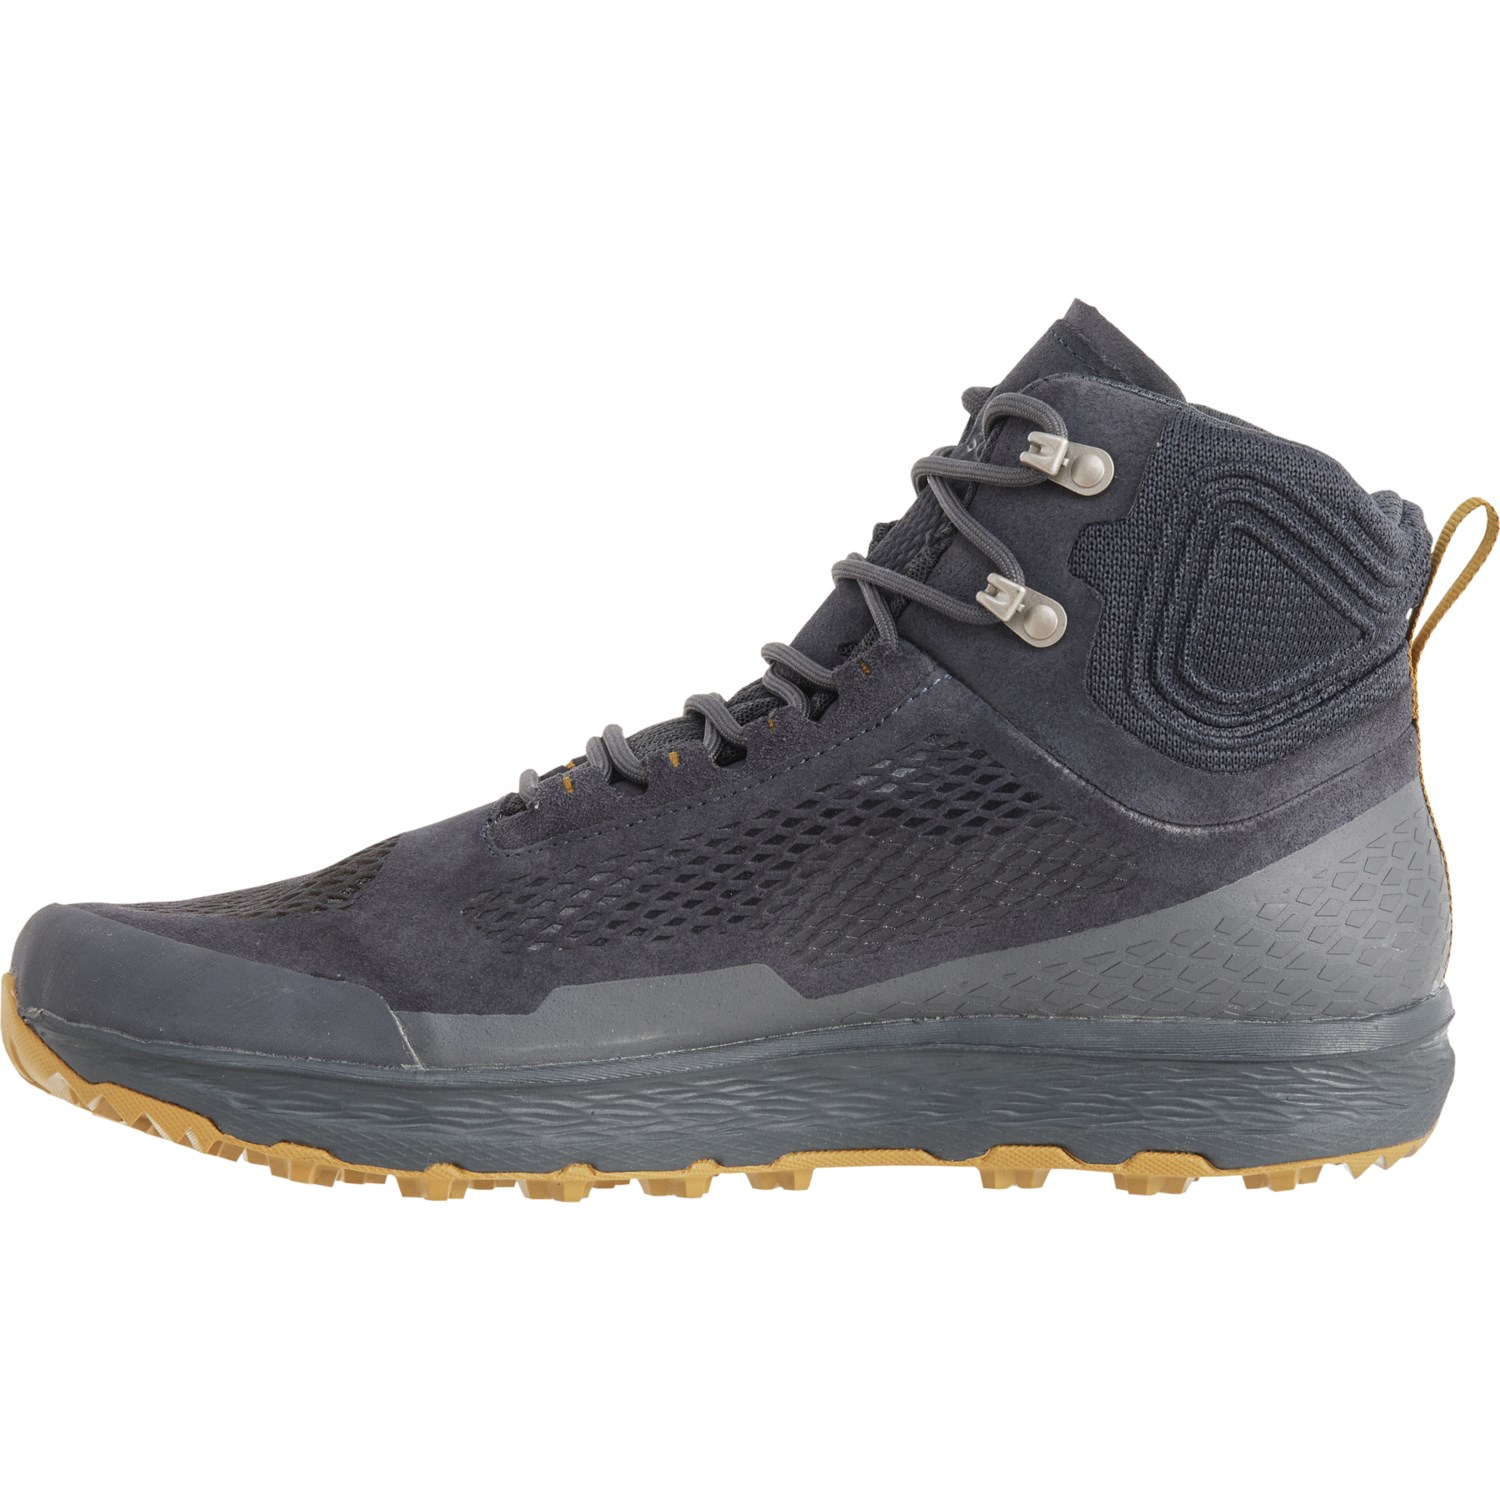 Vasque Breeze LT NTX Hiking Boots (For Men) - Save 60%